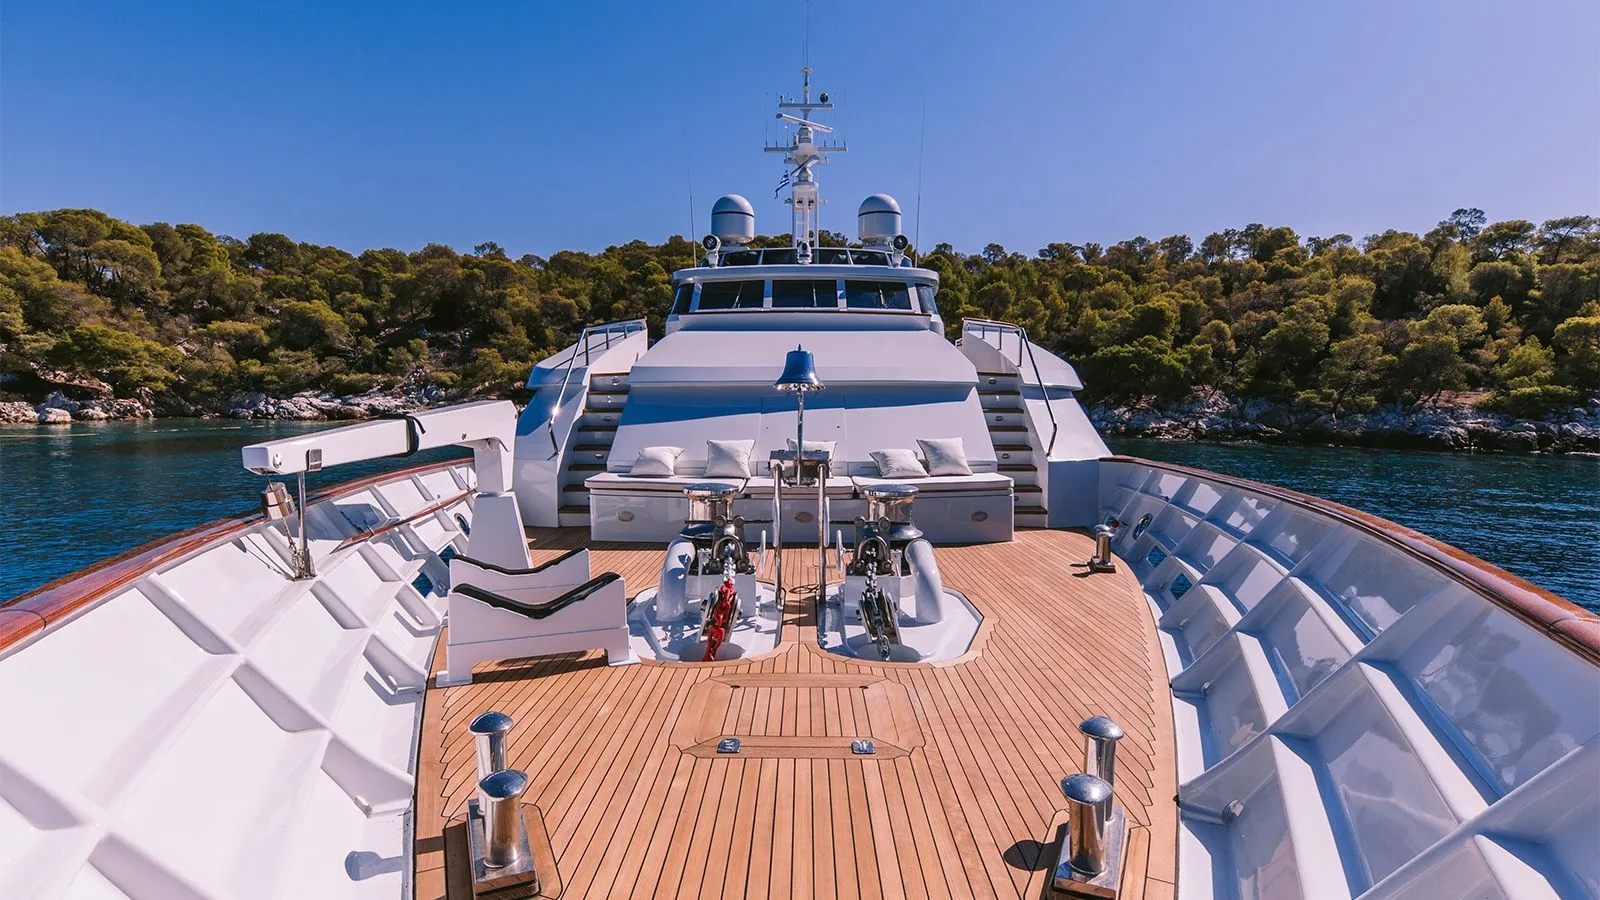 Bow Of The Yacht